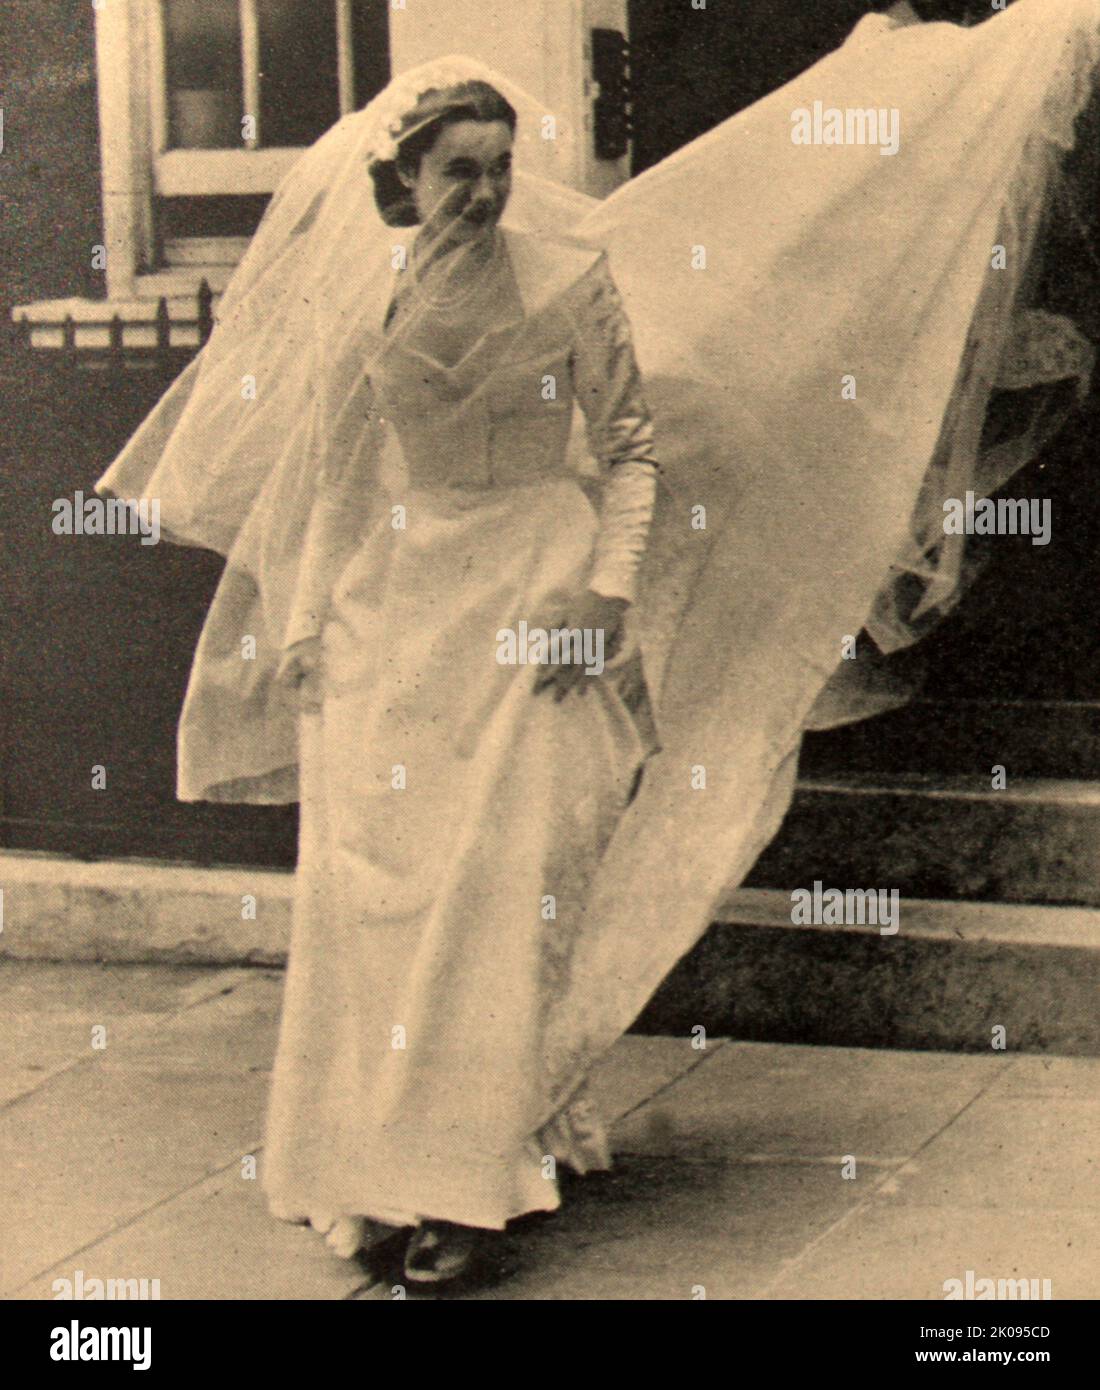 Marion Stein arrived for her wedding to Lord Harewood. On 29 September 1949 at St. Mark's Church, London, Lord Harewood married Marion Stein, a concert pianist and the daughter of the Viennese music publisher Erwin Stein. George Henry Hubert Lascelles, 7th Earl of Harewood, KBE, AM (7 February 1923 - 11 July 2011), styled The Honourable George Lascelles before 1929 and Viscount Lascelles between 1929 and 1947, was a British classical music administrator and author. Illustrated London News. Stock Photo